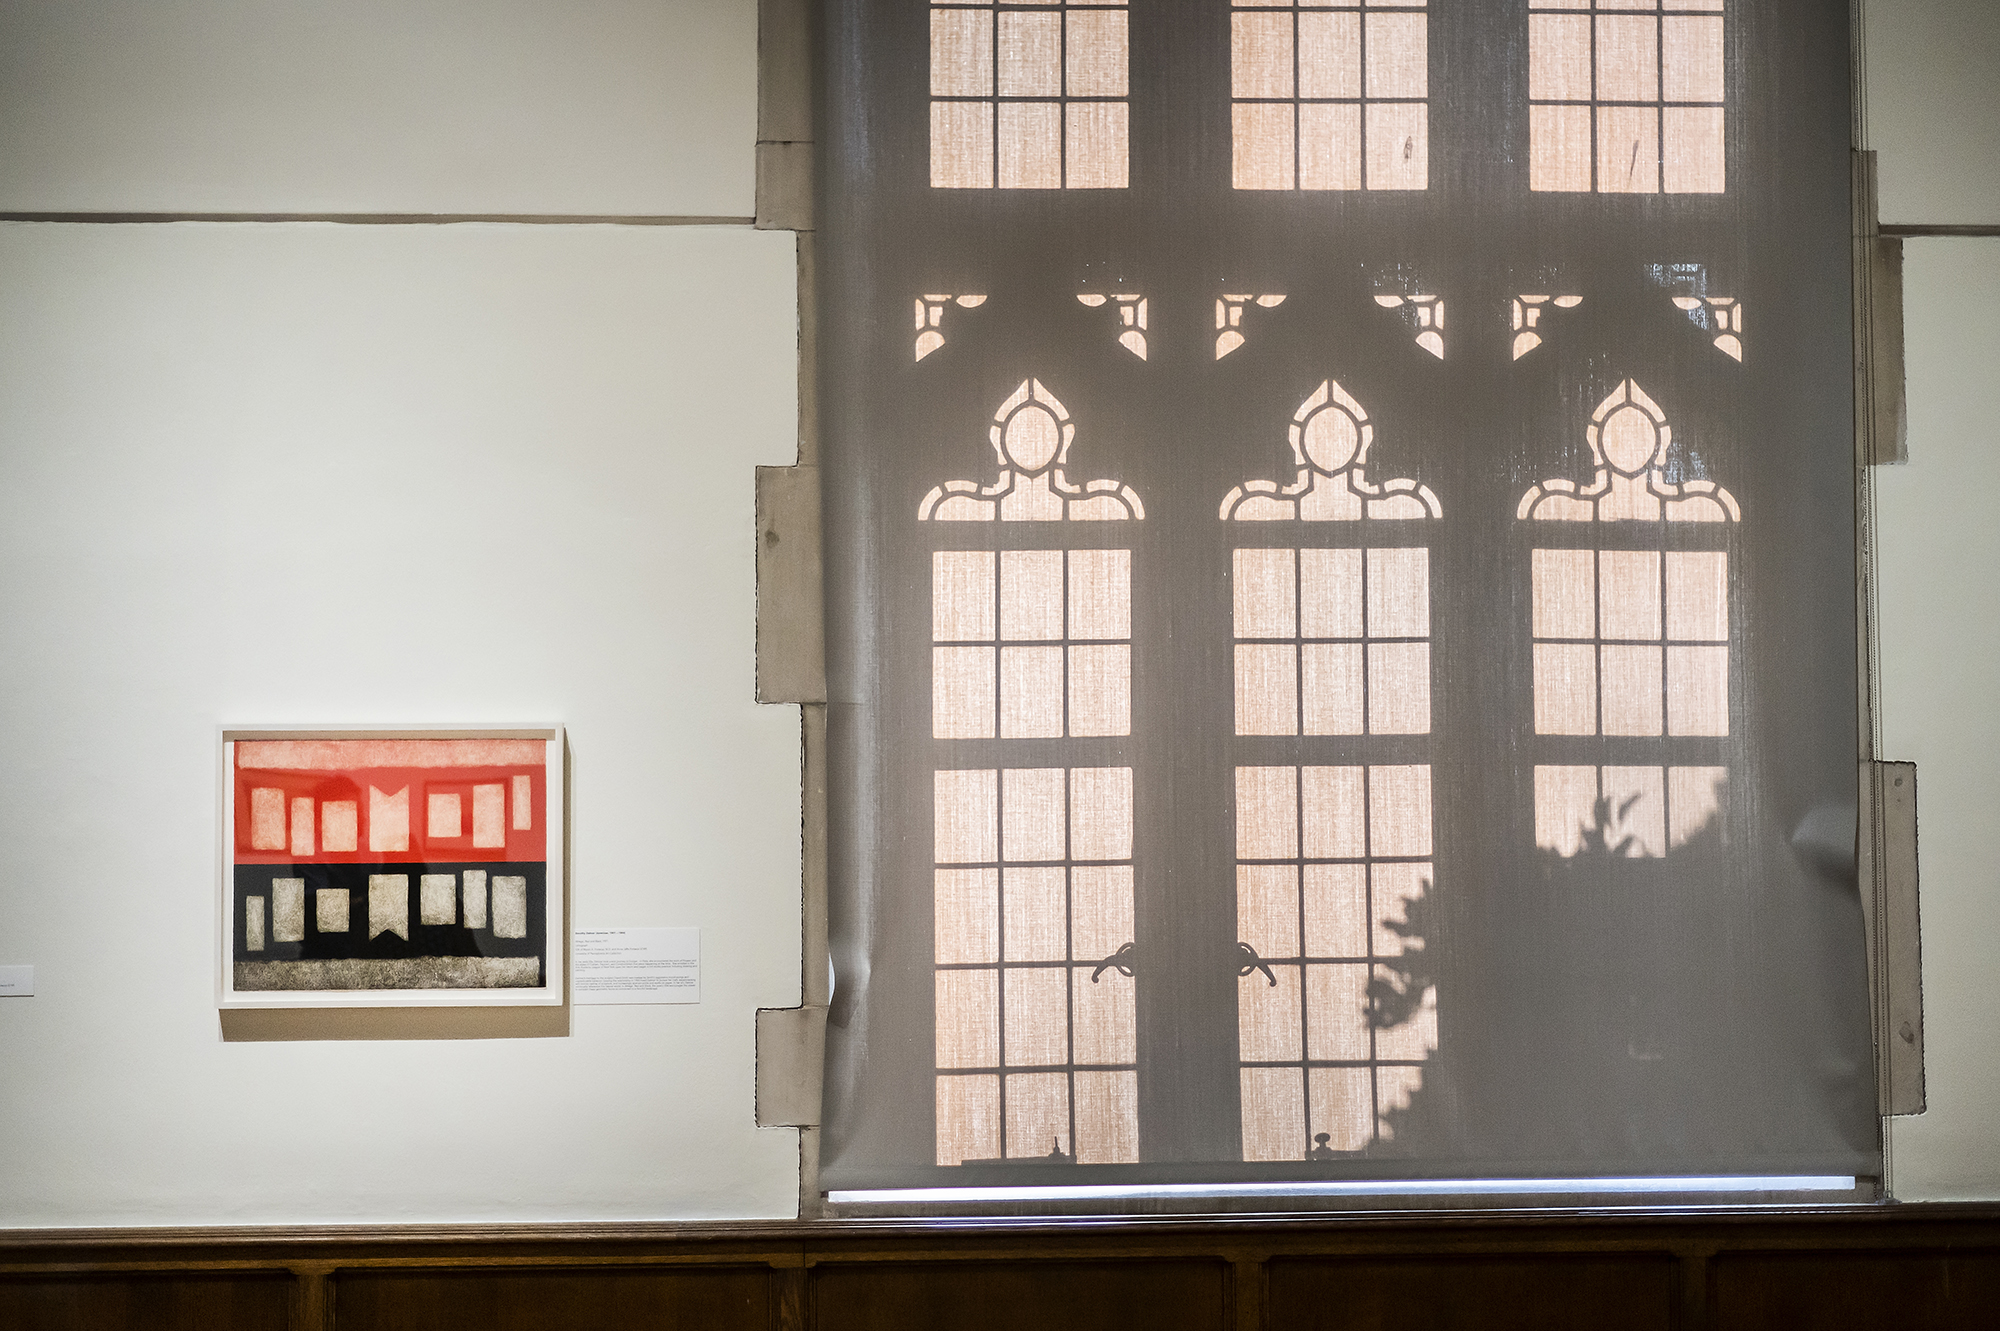 An artwork hangs on the wall beside a curtain pulled down with the reflection of ornate windows in relief.